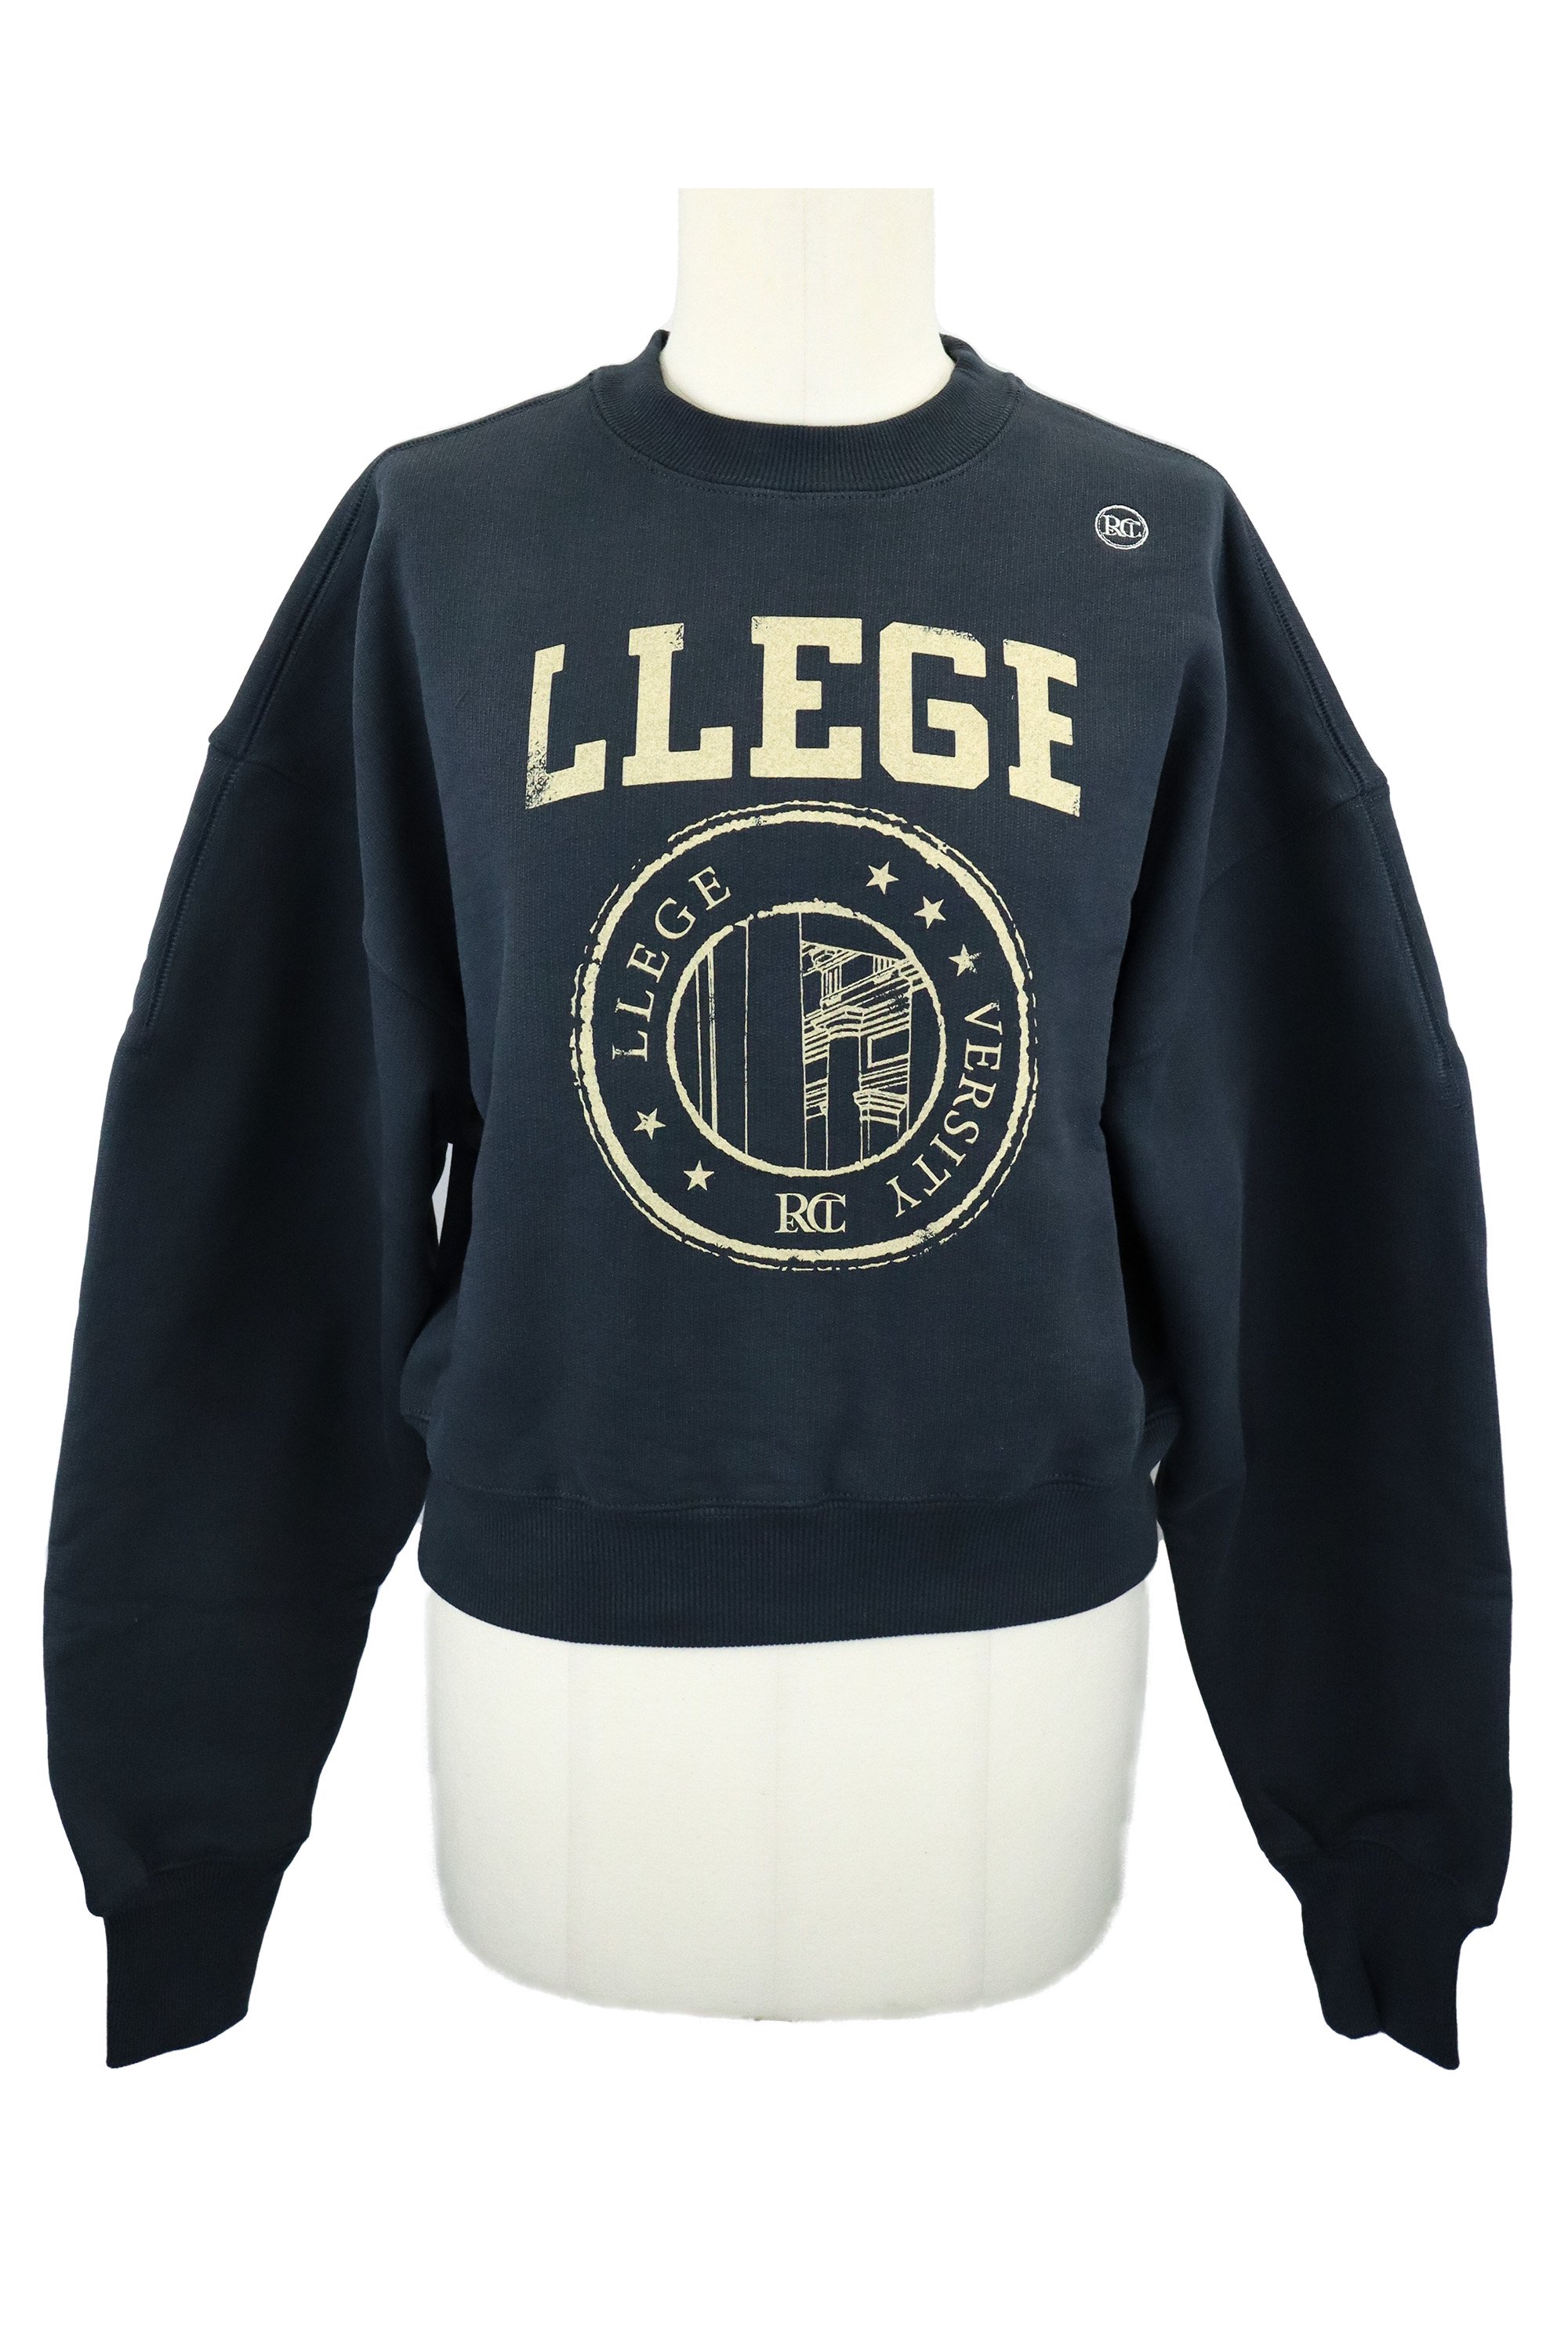 <img class='new_mark_img1' src='https://img.shop-pro.jp/img/new/icons6.gif' style='border:none;display:inline;margin:0px;padding:0px;width:auto;' />RECTO Logo sweatshirt (CHACOAL)